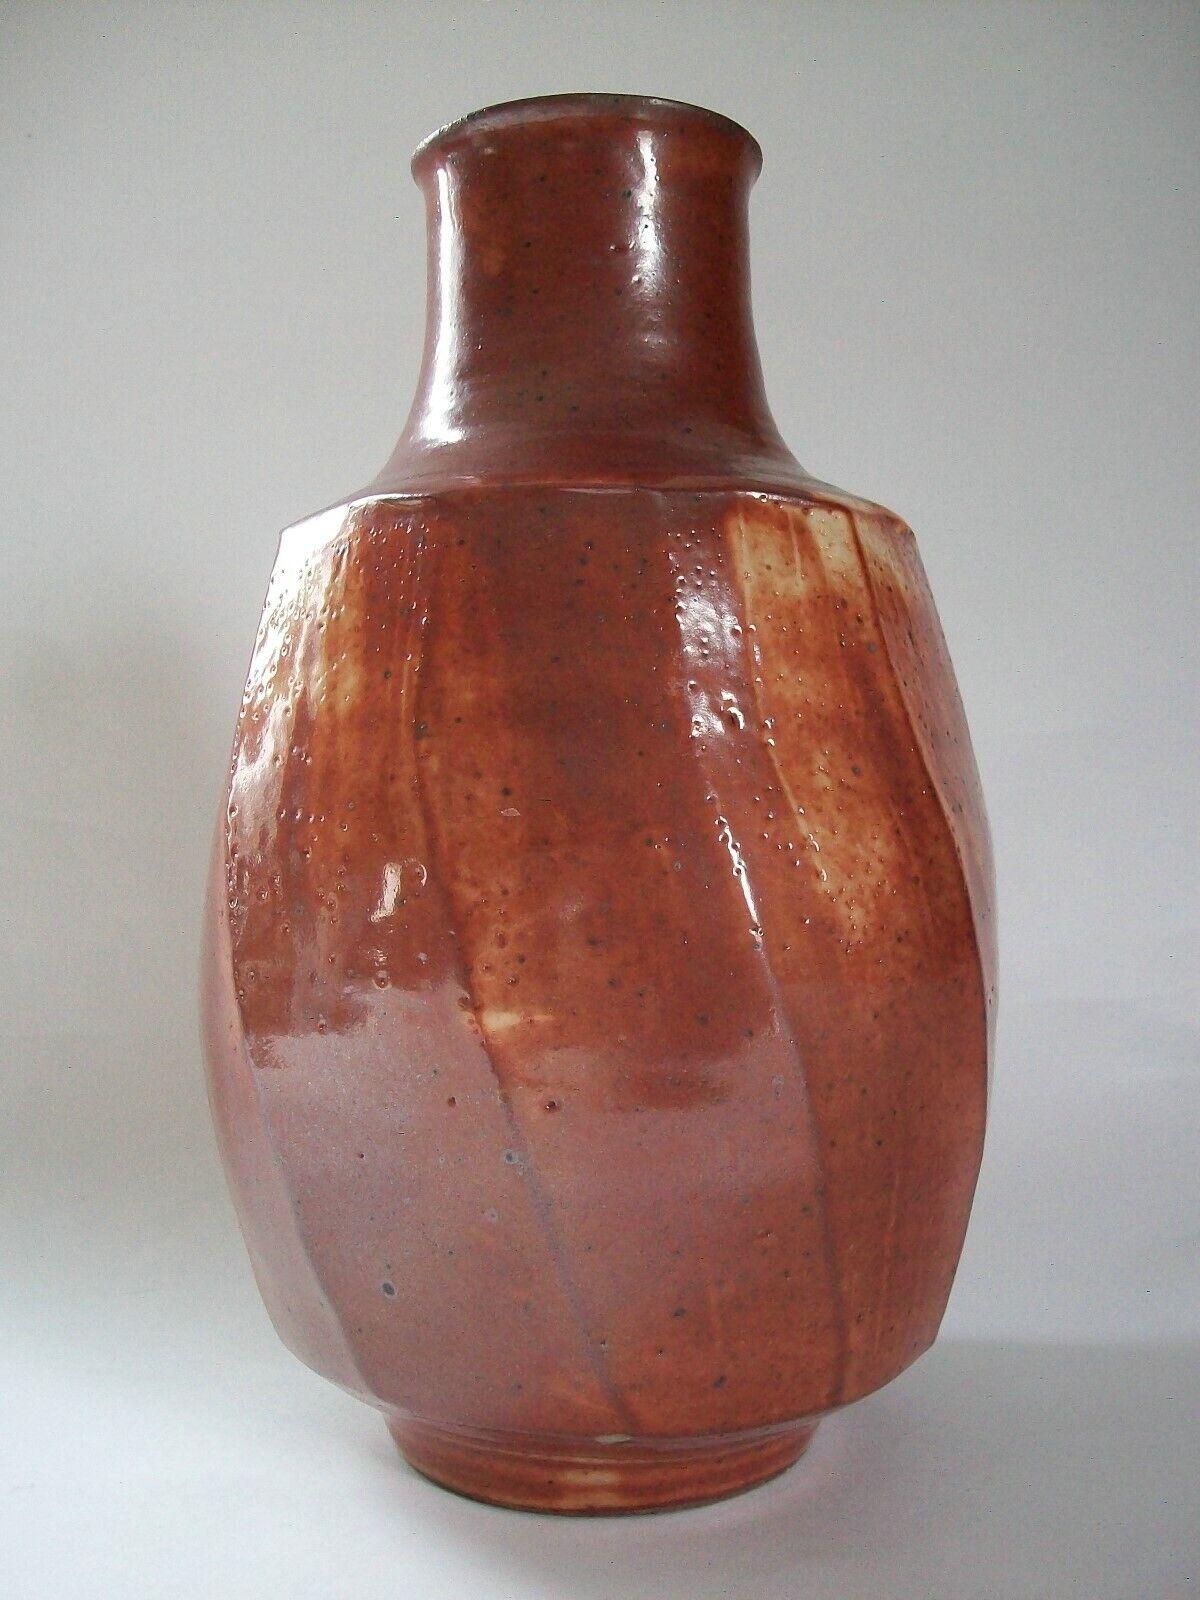 Mid Century studio pottery stoneware bottle vase with cut sides - rich red glaze over a cream base - maker's mark stamp to the base rim (unknown/unidentified potter) - country of origin unknown - circa 1970's.

Excellent vintage condition - minor